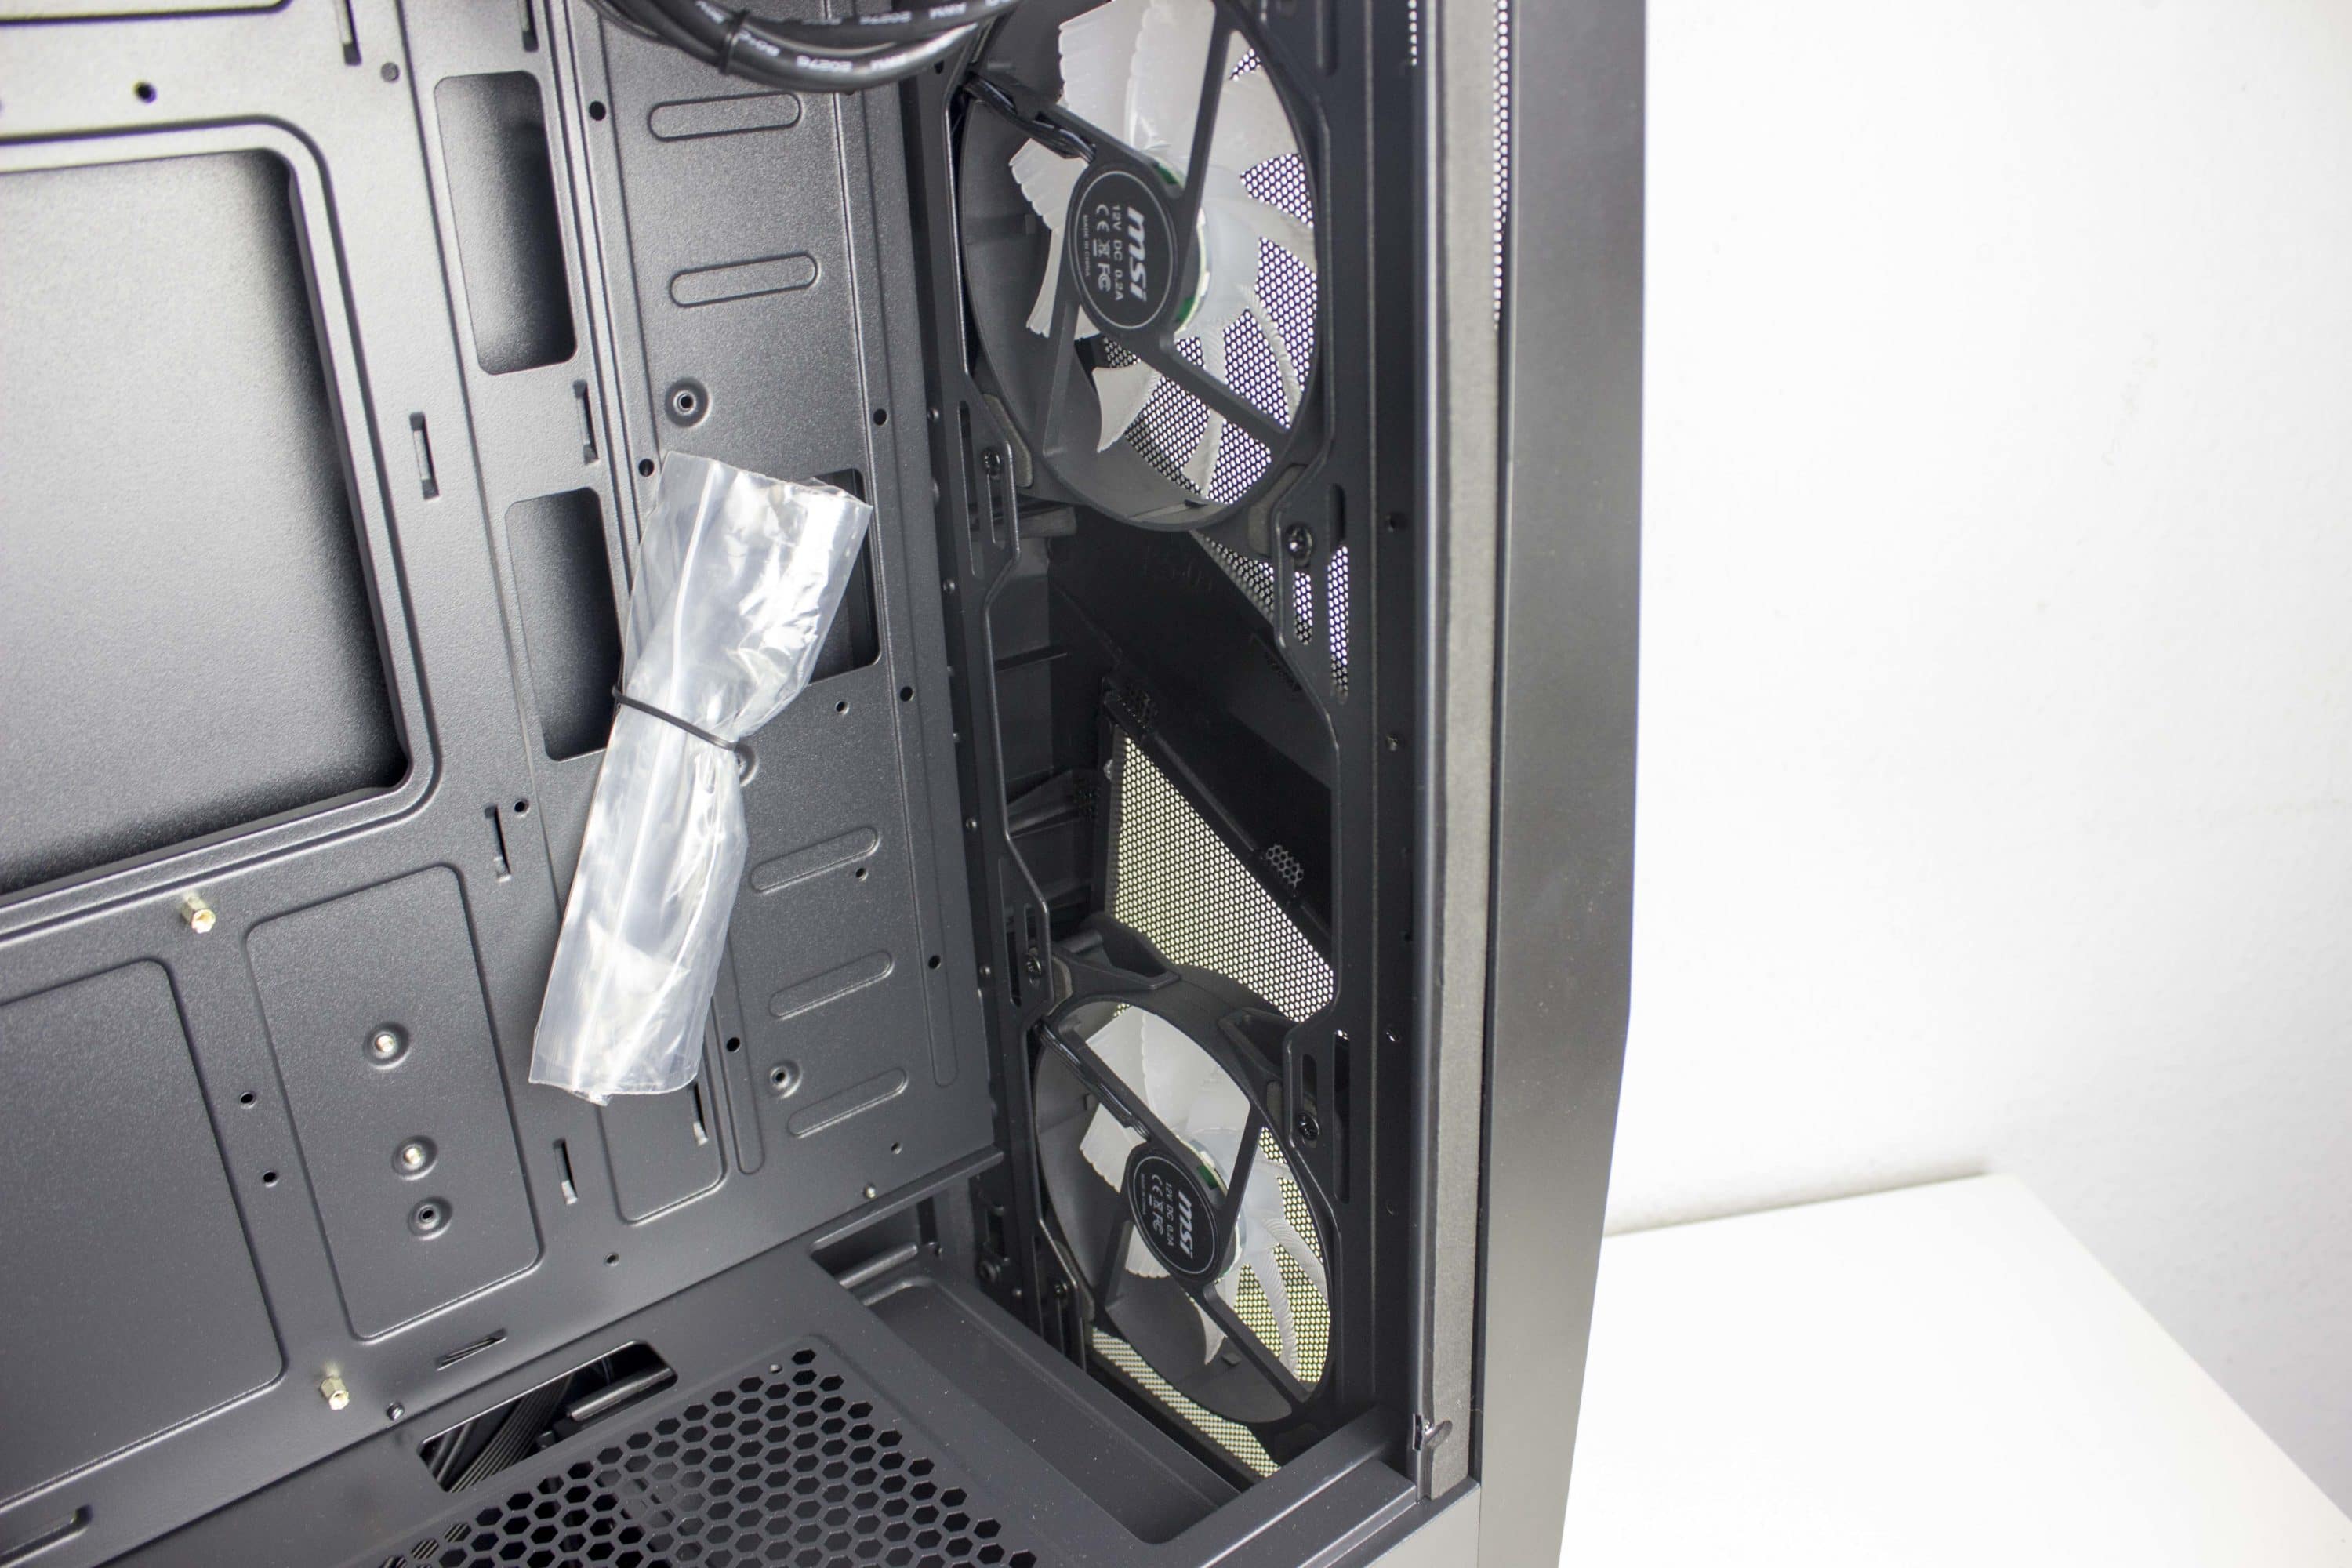  MSI MAG Forge 100R Mid Tower Gaming Computer Case